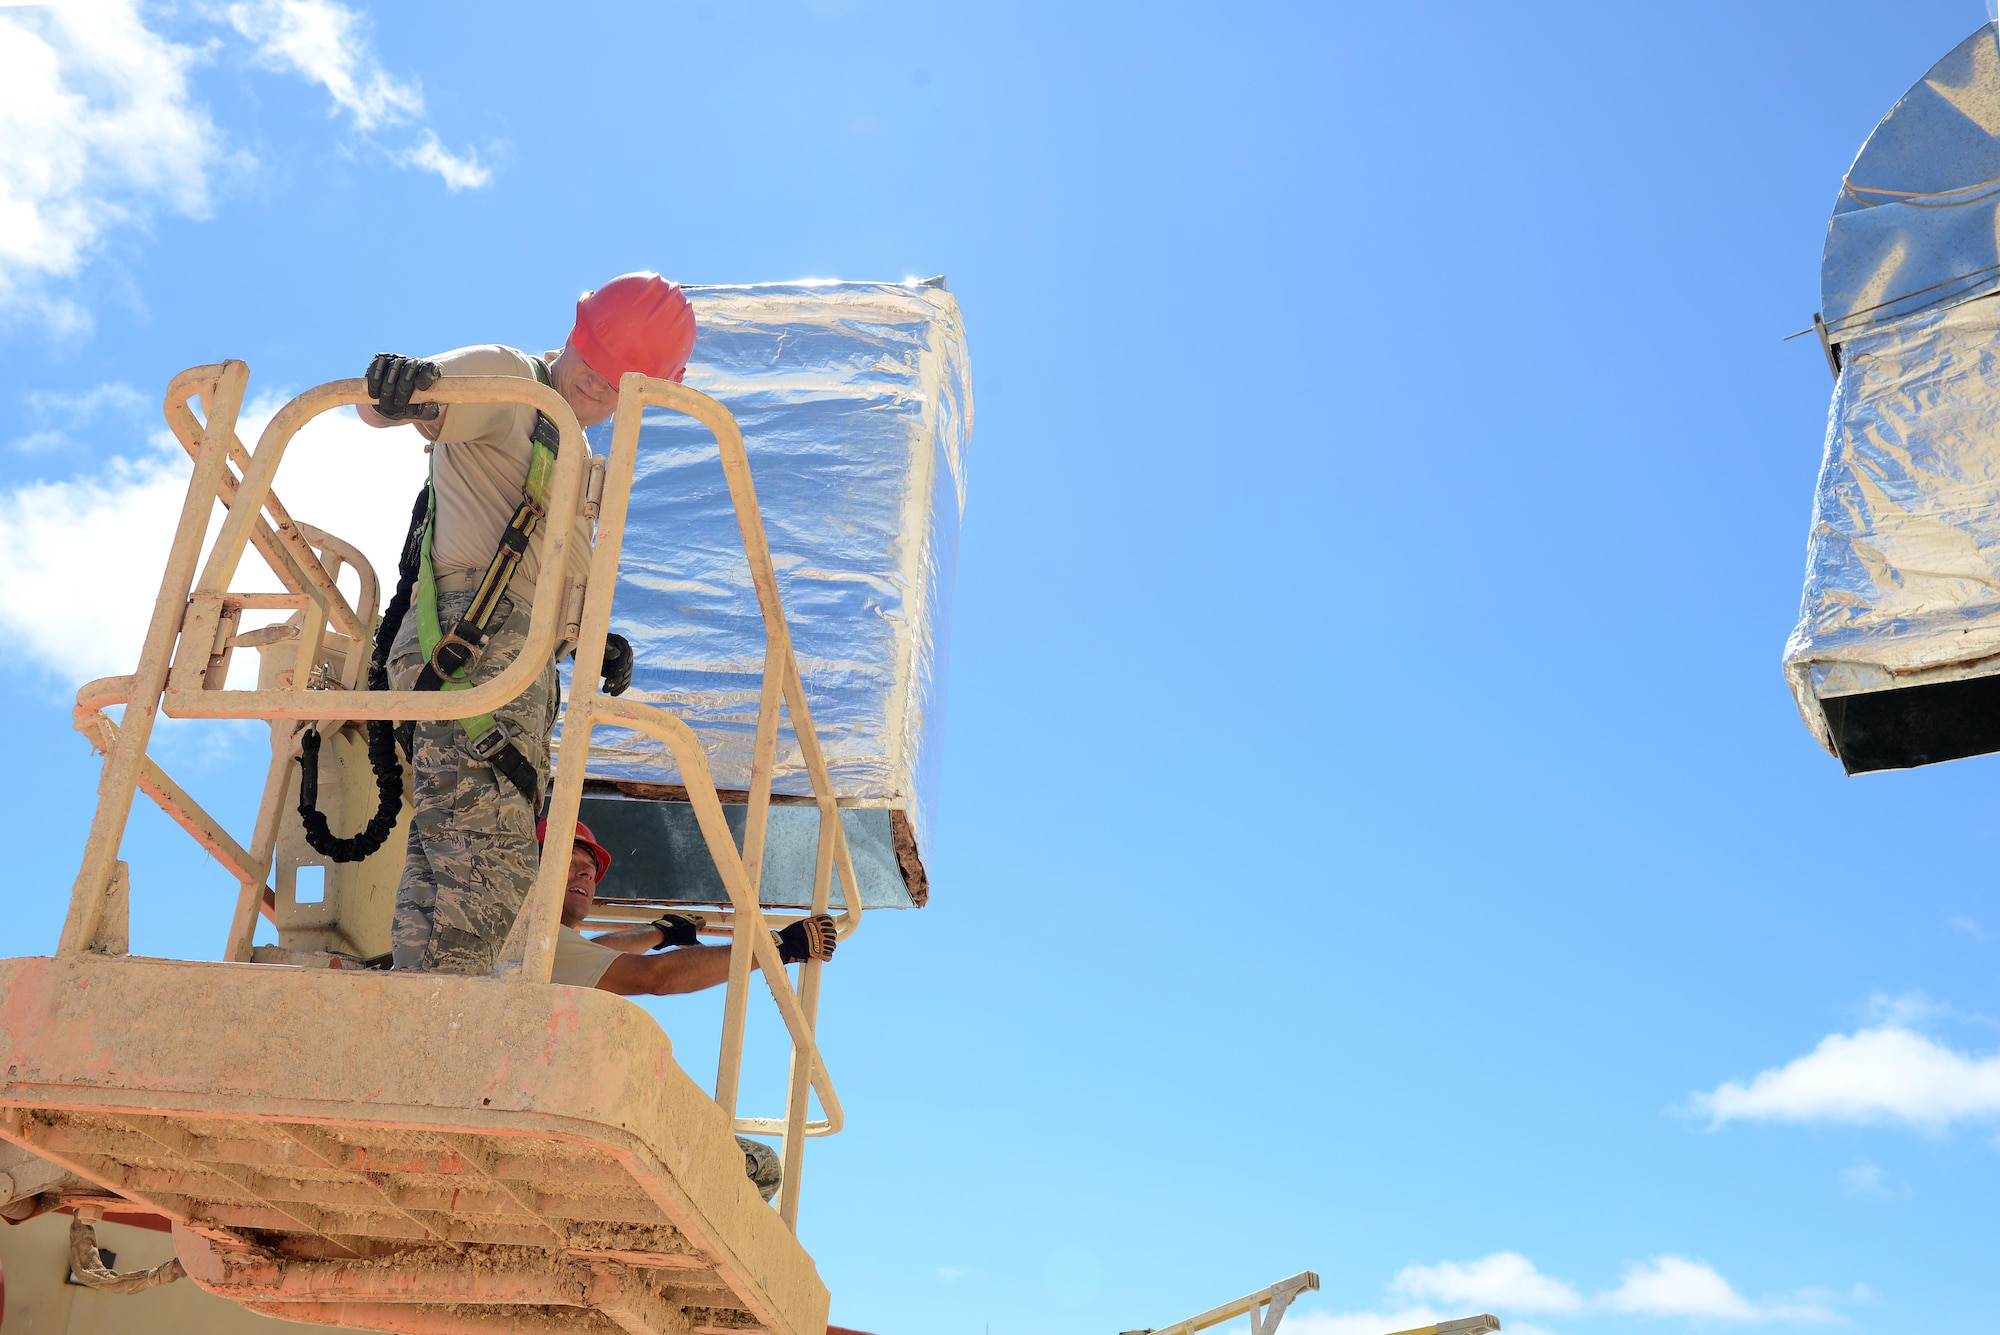 Tech. Sgt. Lonnie Battenfield, left, 556th RED HORSE Squadron utilities craftsman, and Staff Sgt. Mathew Scroggins, 556th RHS operations management technician, transport an exterior duct section to the Explosive Ordnance Disposal warehouse July 20, 2016, at Andersen Air Force Base, Guam. The EOD warehouse will be utilized for Silver Flag training and will store items such as Humvees, bomb suits, EOD robots and training equipment. (U.S. Air Force photo/Airman 1st Class Arielle Vasquez)